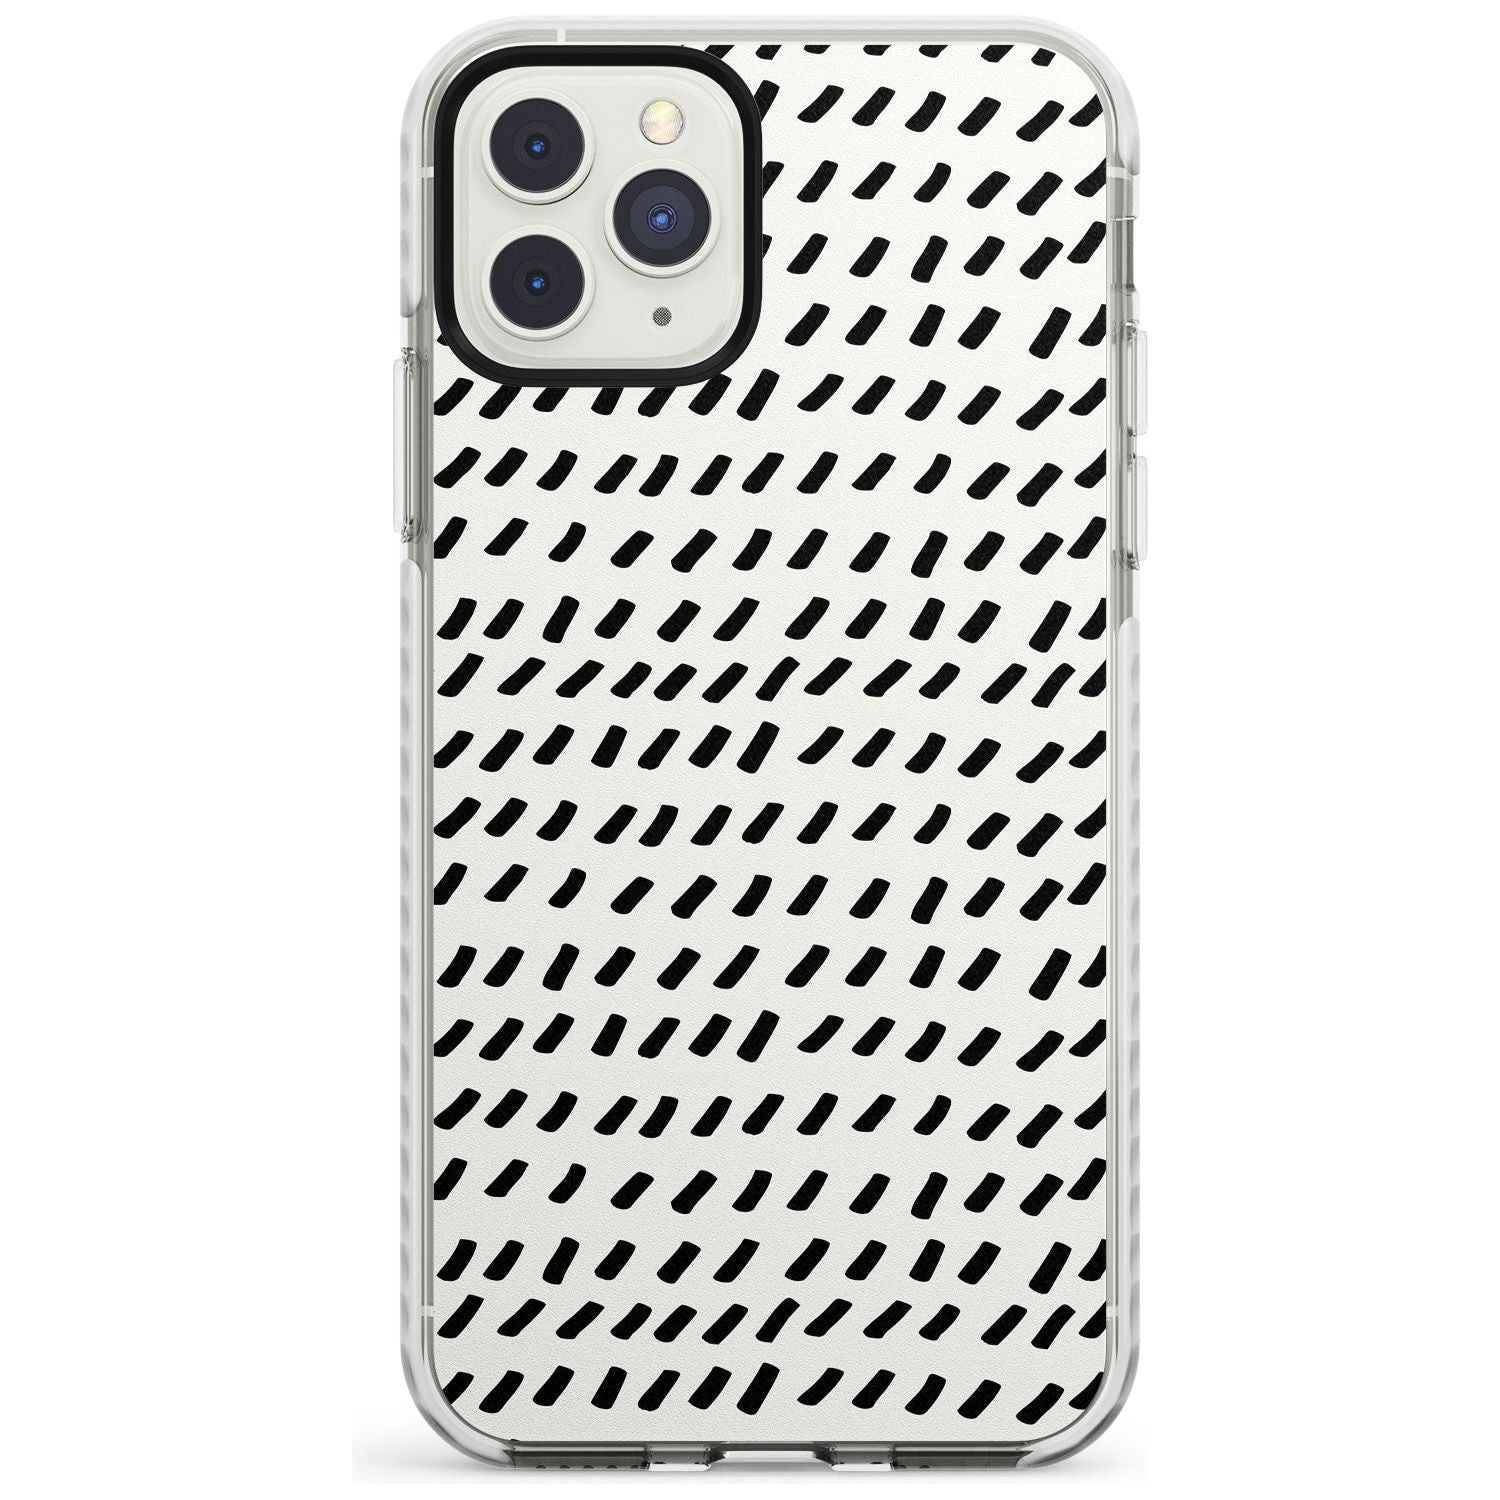 Hand Drawn Lines Pattern Impact Phone Case for iPhone 11 Pro Max